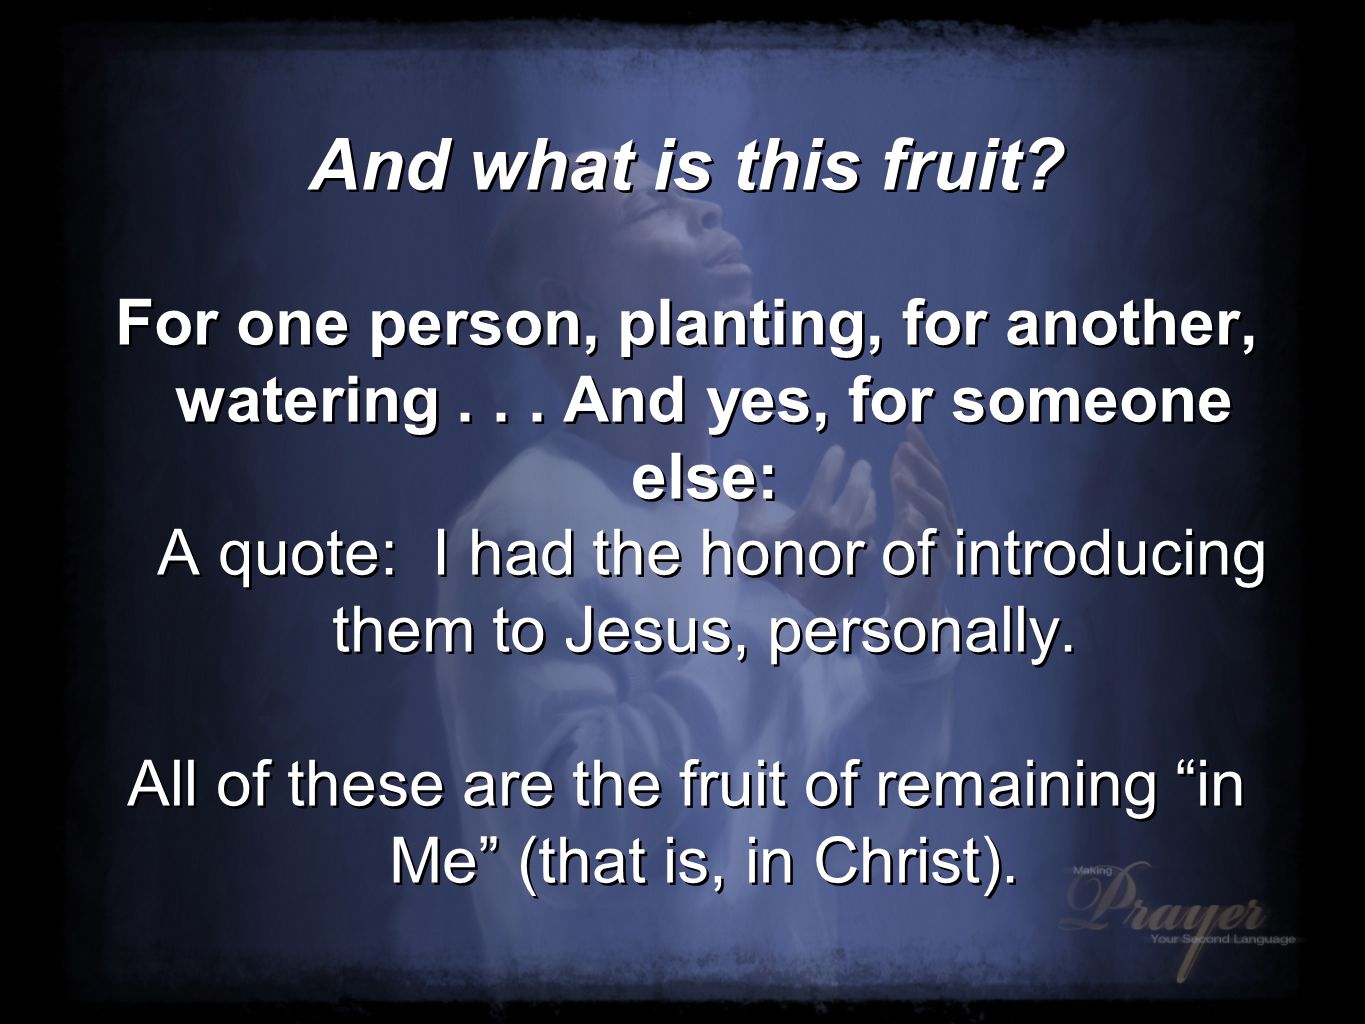 And what is this fruit. For one person, planting, for another, watering...